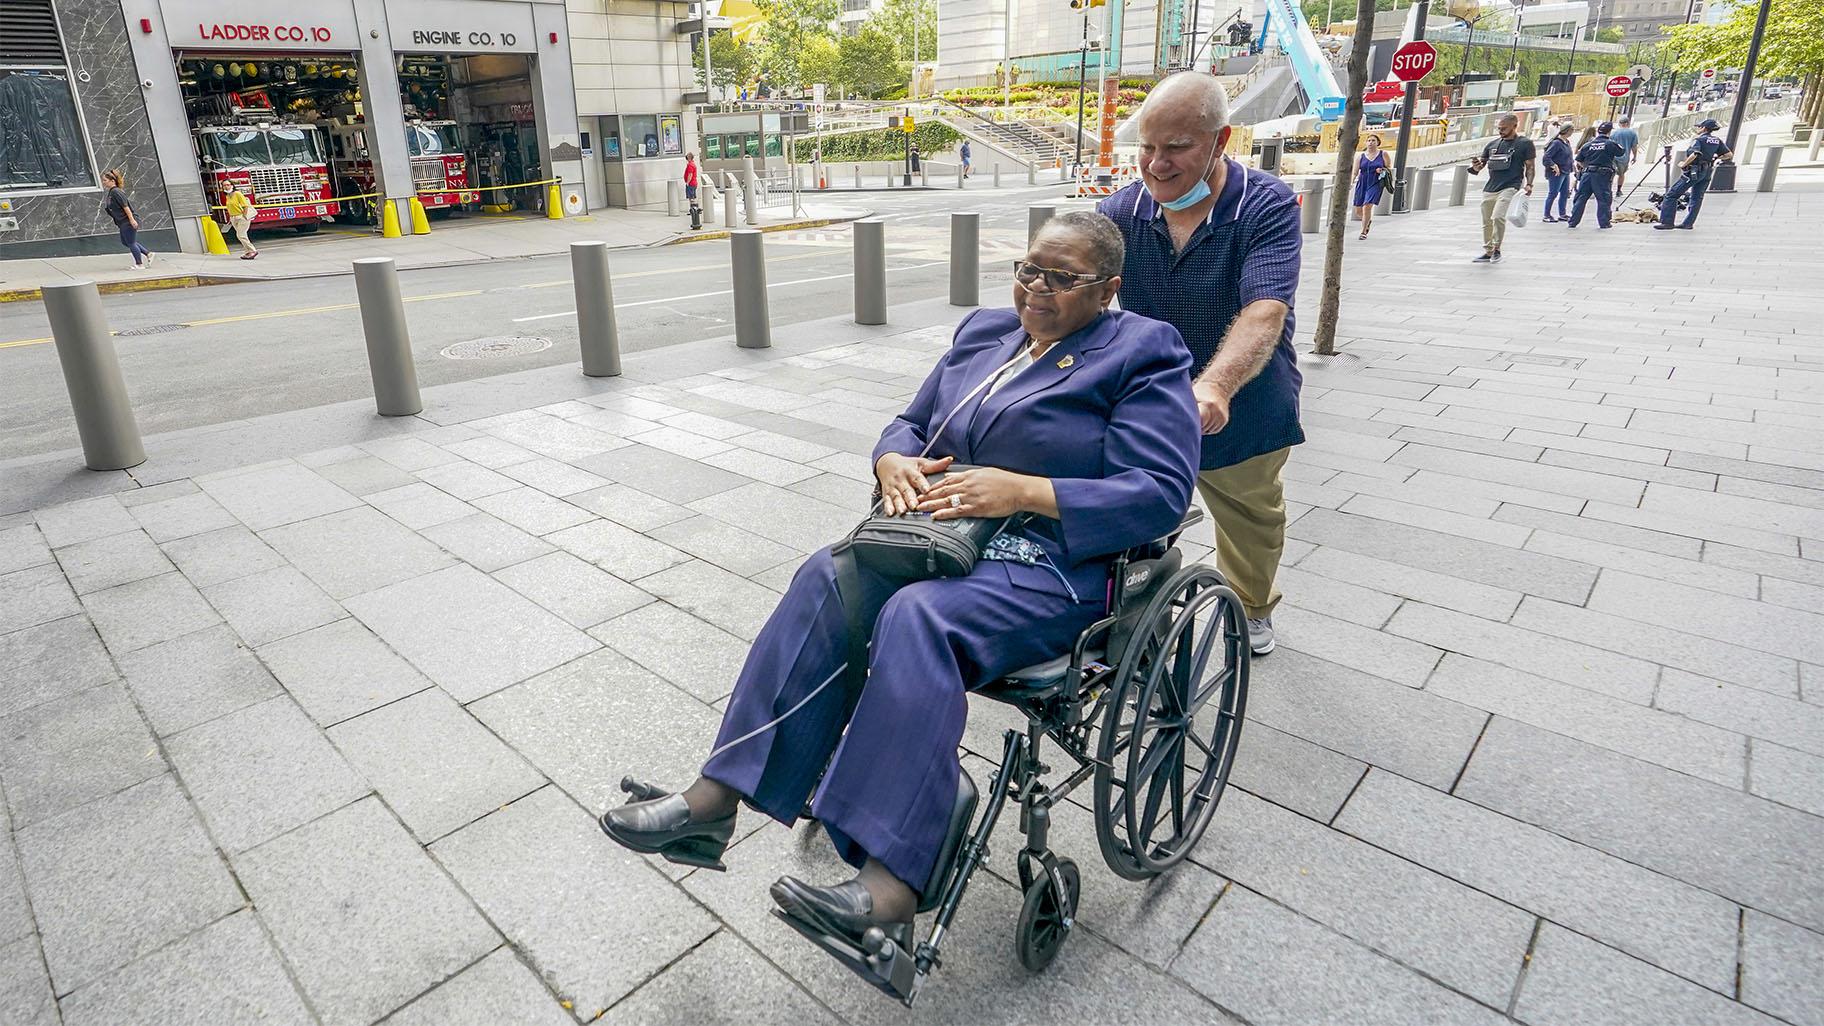 Retired NYPD Detective Barbara Burnette, left, who worked on the World Trade Center pile for 23 days after the terrorist attacks, and her husband Lebro Burnette walk away from the 9/11 Memorial & Museum, Wednesday, Sept. 8, 2021, in New York. (AP Photo / Mary Altaffer) 